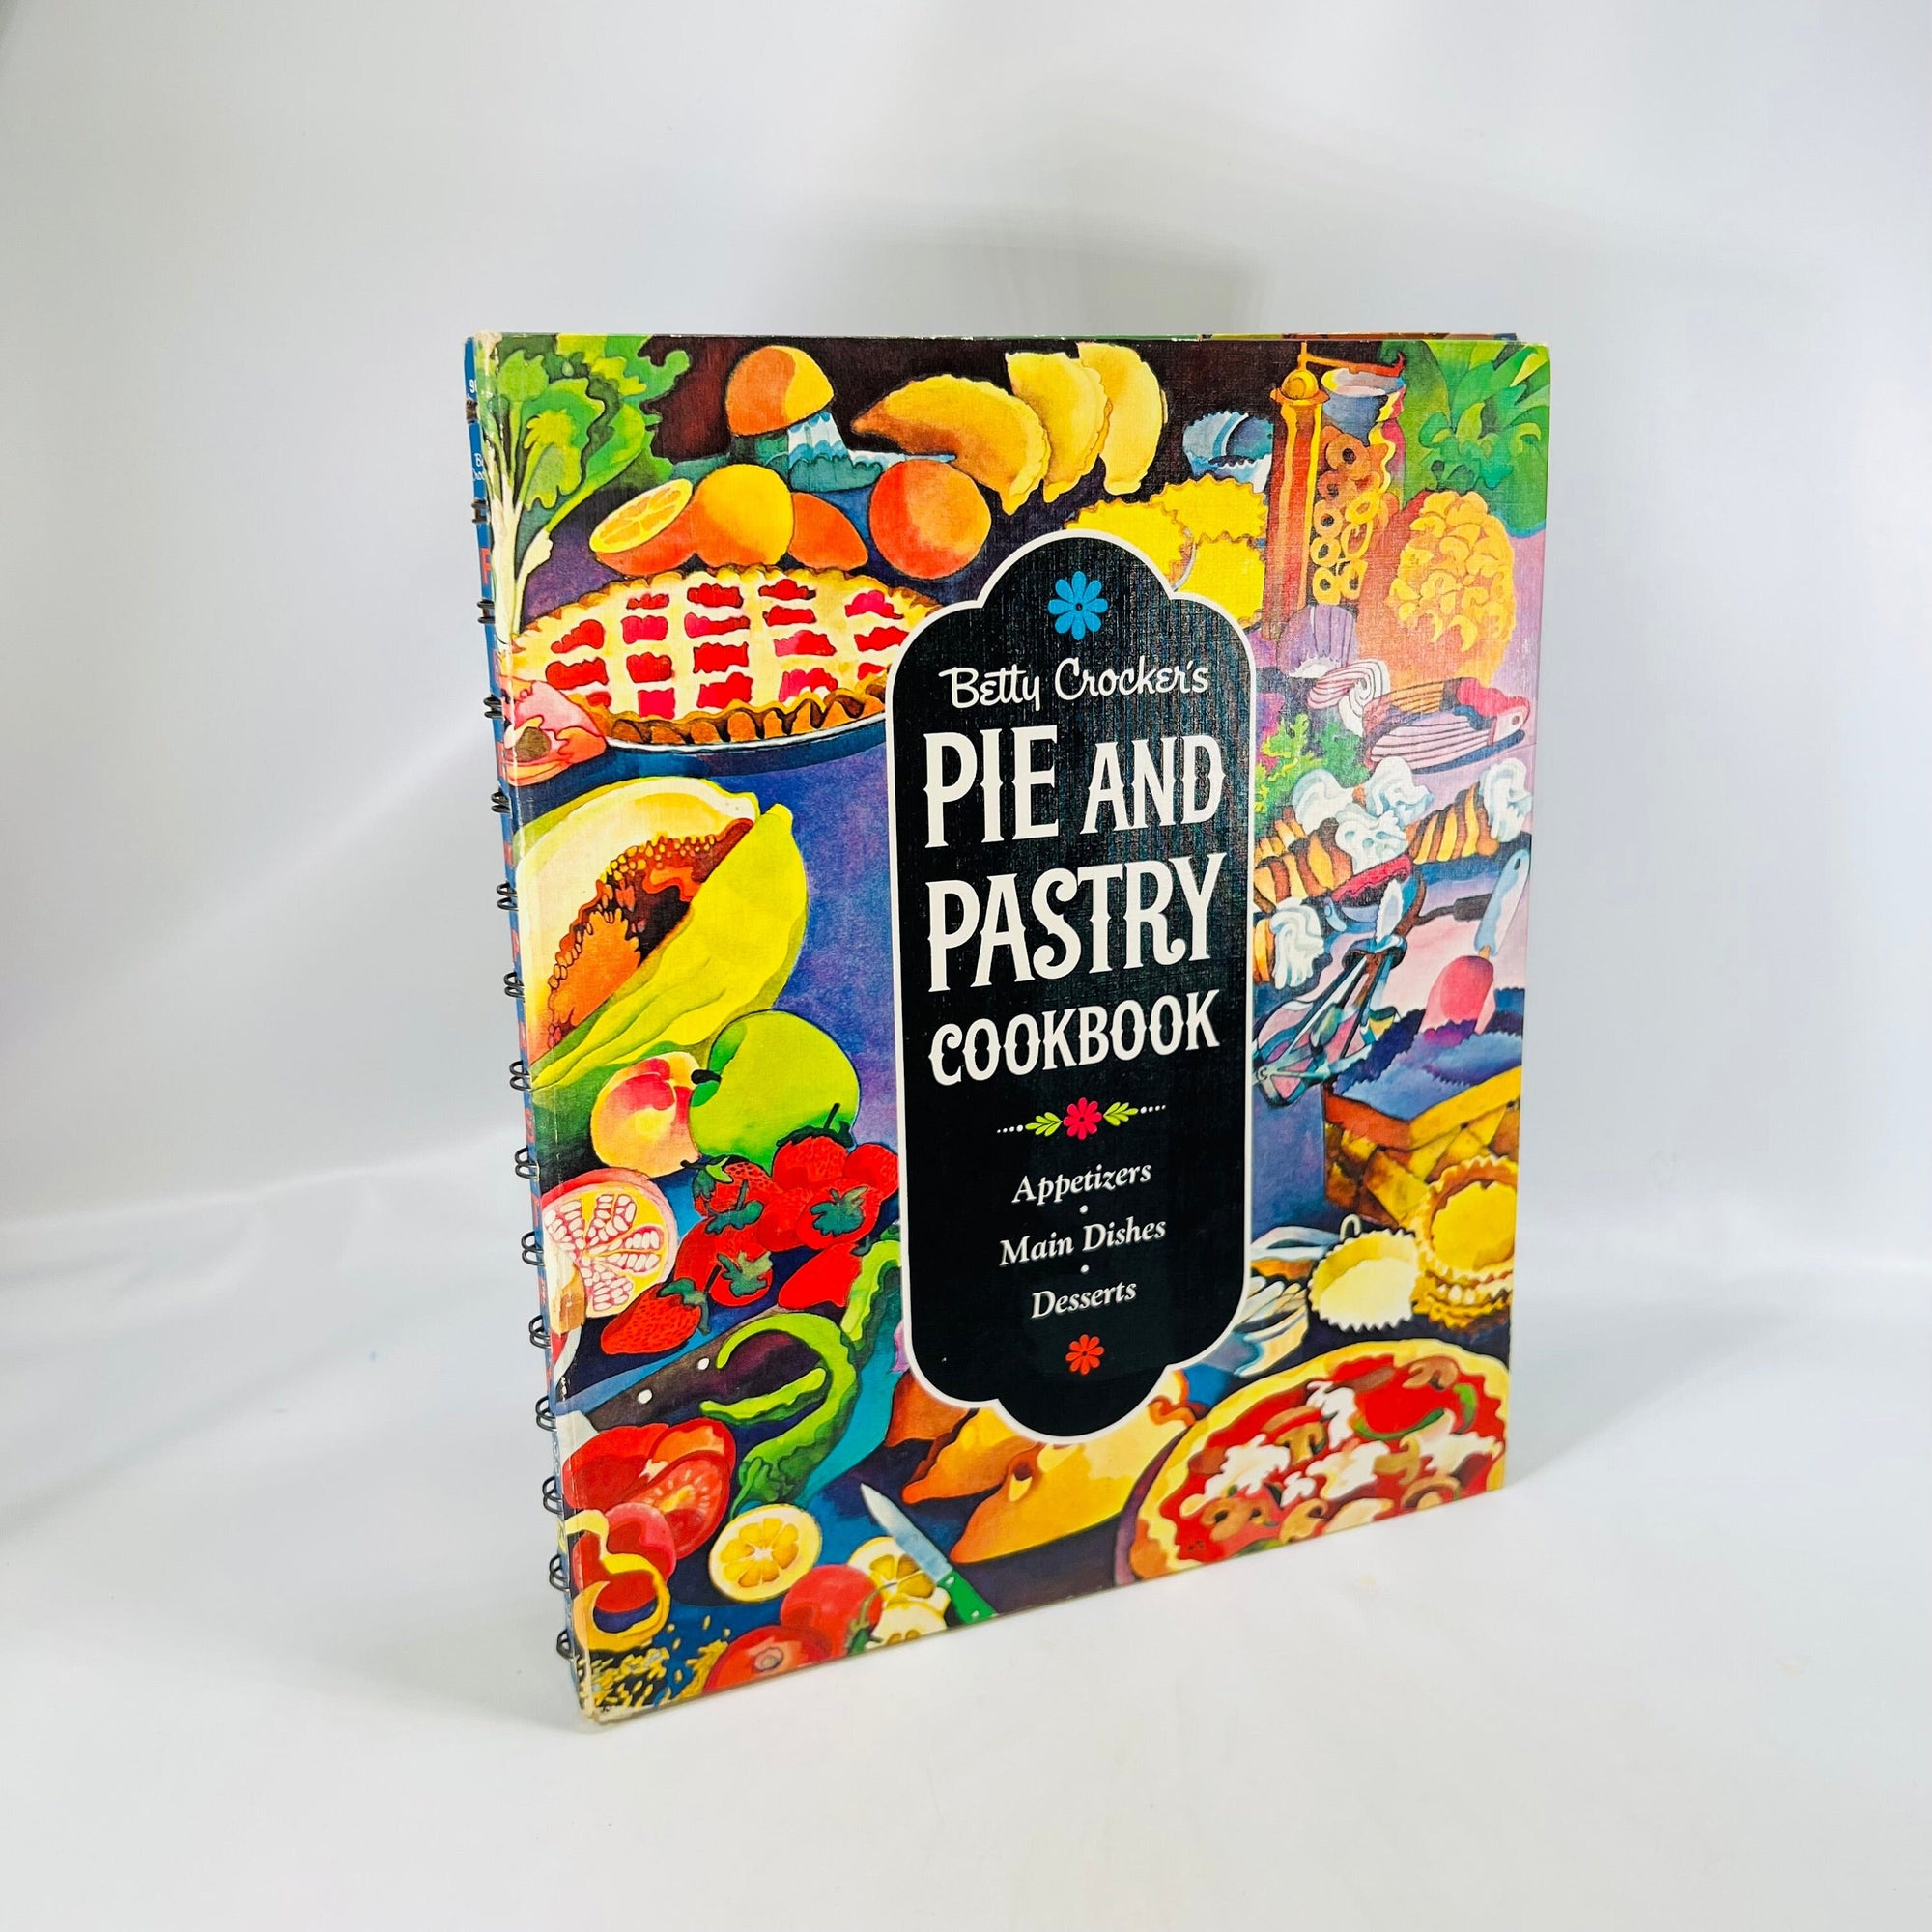 Betty Crocker's Pie and Pastry Cookbook 1968 Golden Press First Edition First Printing  Vintage Cookbook